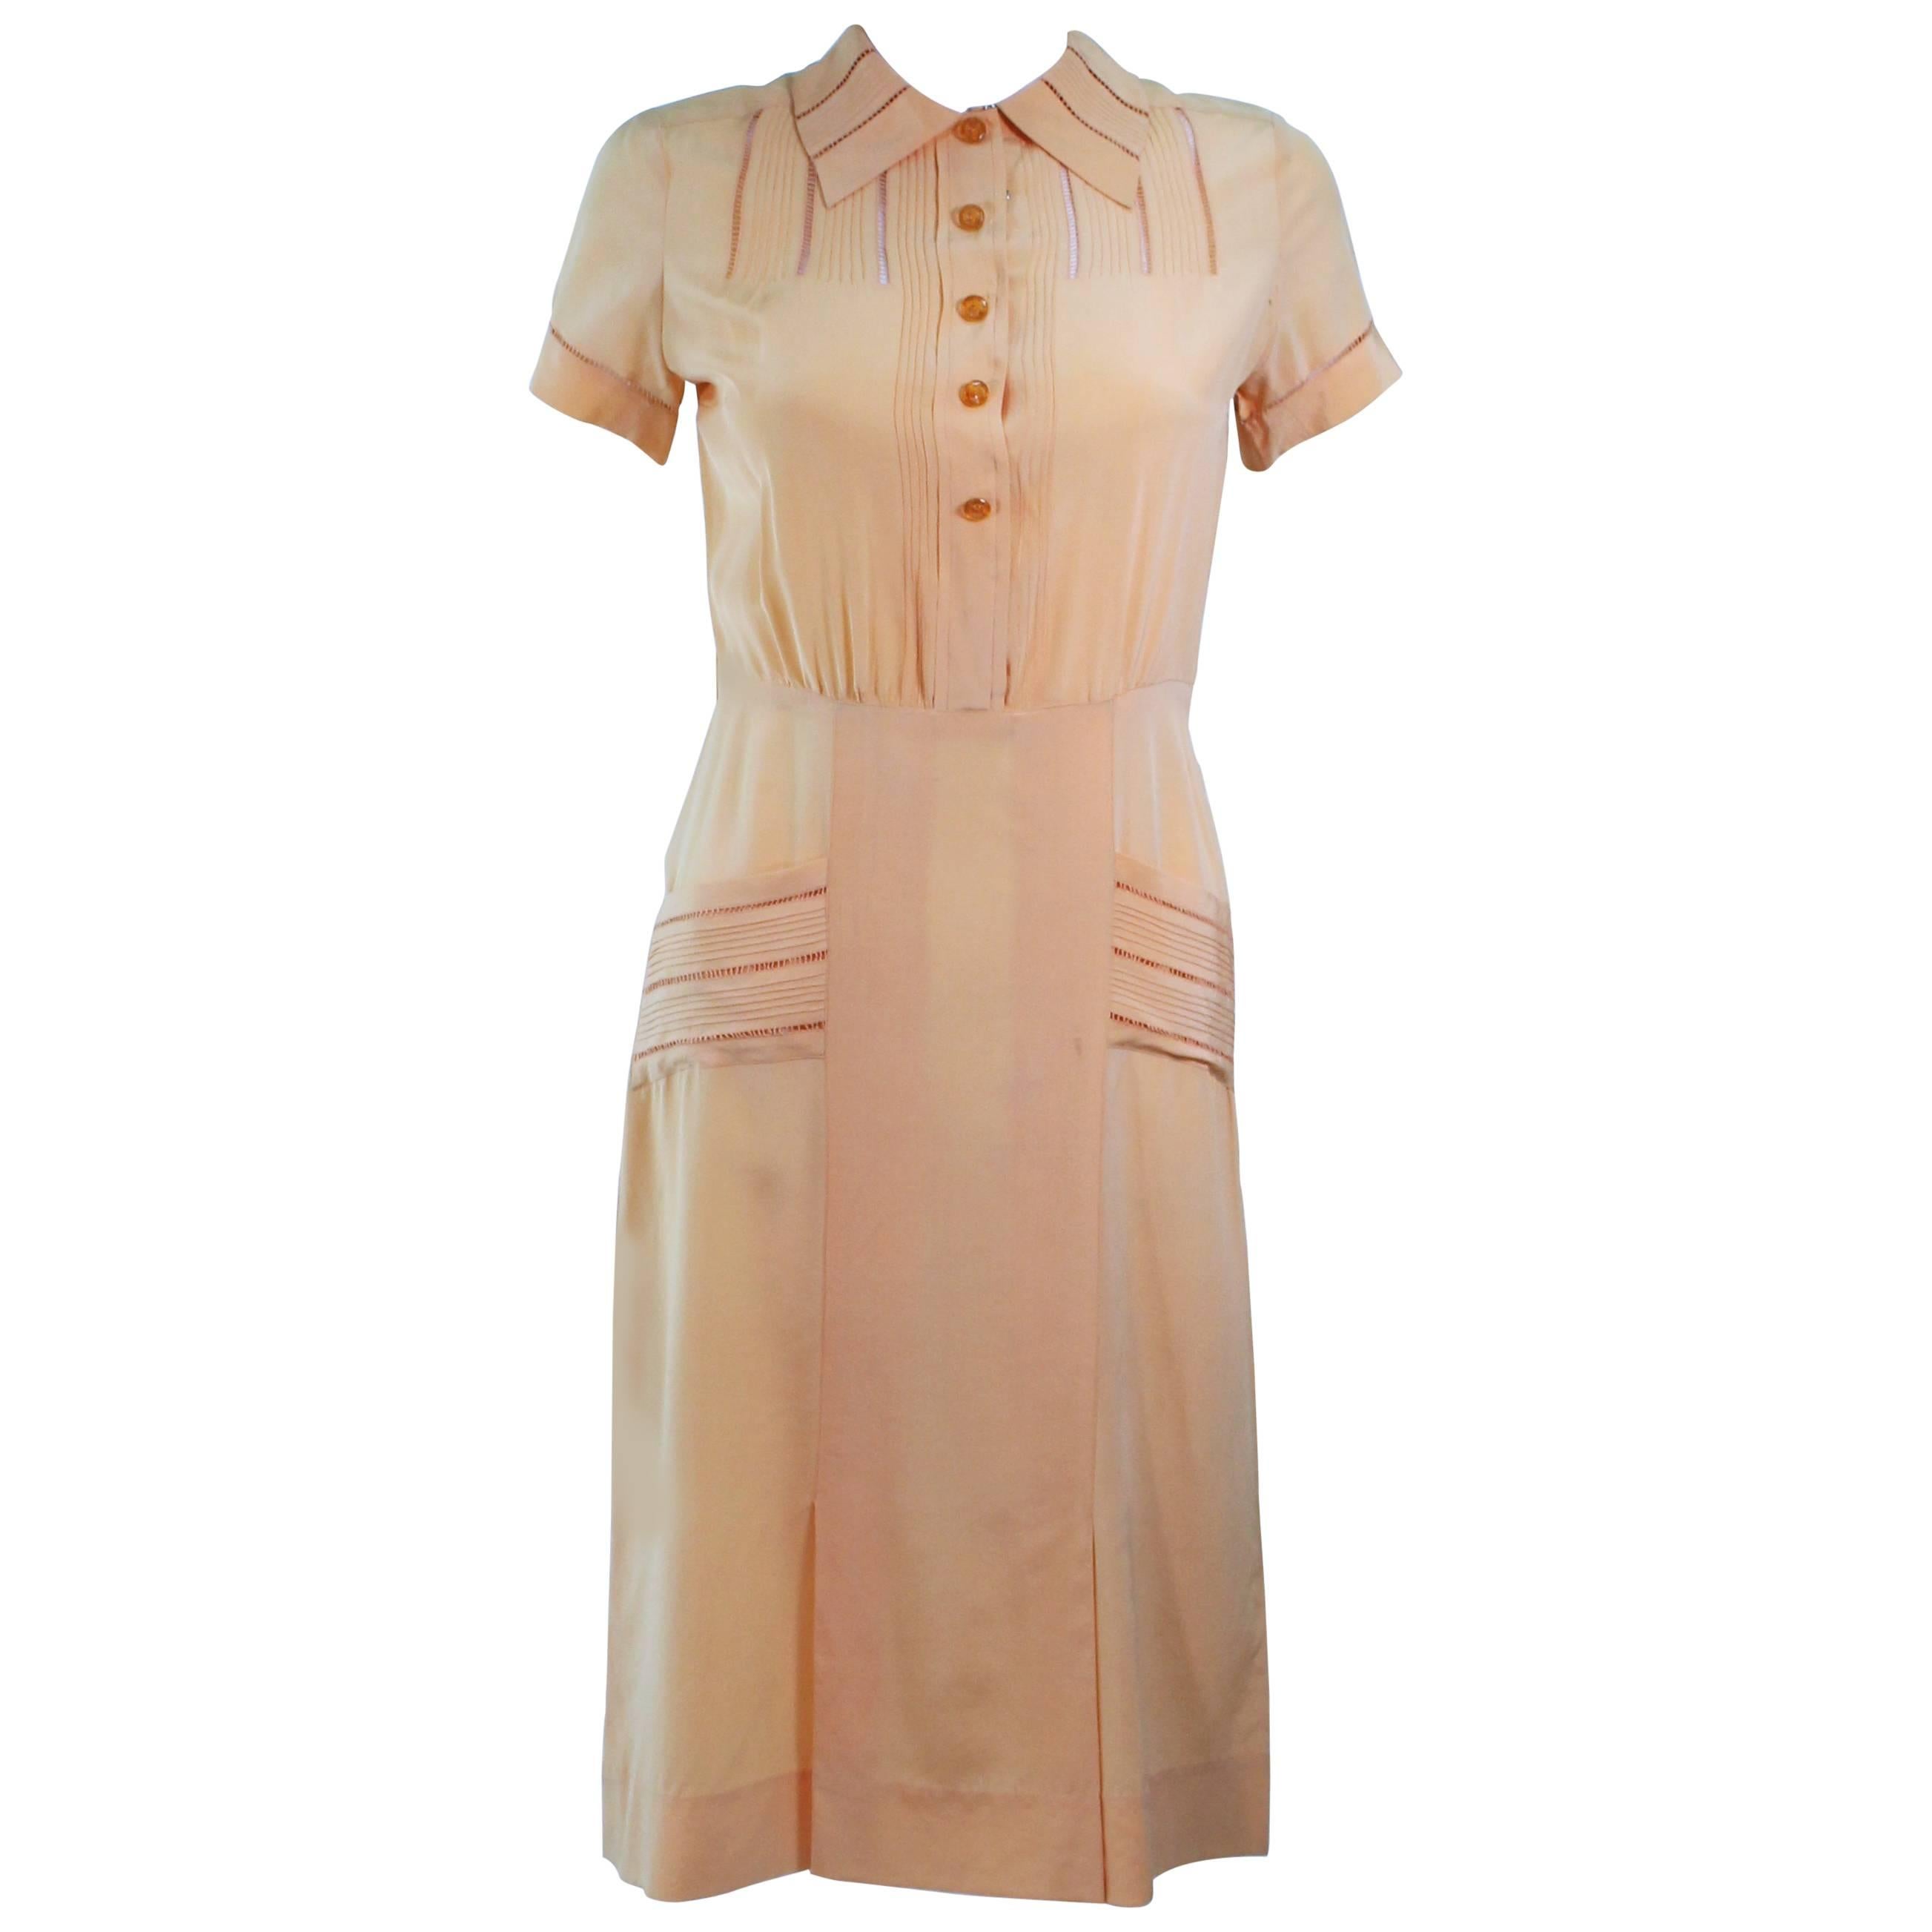 Vintage 1940's Apricot Silk Day Dress Size 2 4 For Sale